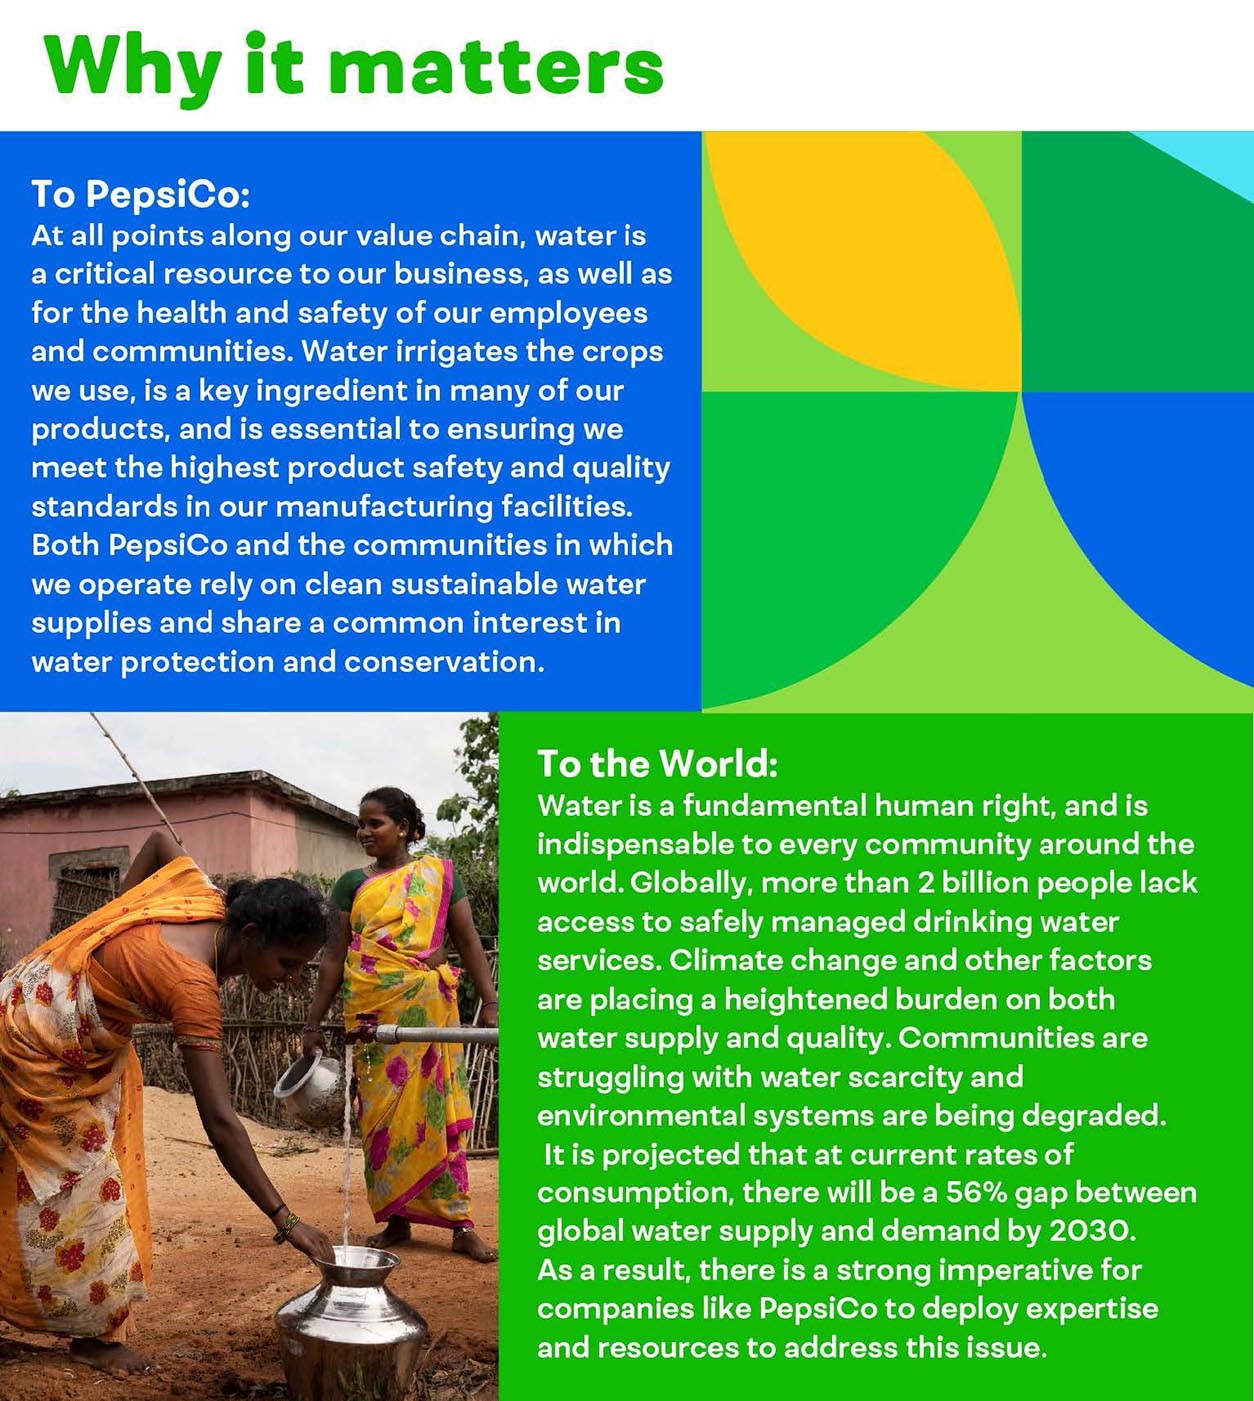 Why it matters: at all points in our value chain, water is a critical resource to our business, and health and safety of employees + communities. Water is a fundamental right, indispensable to every community around the world.